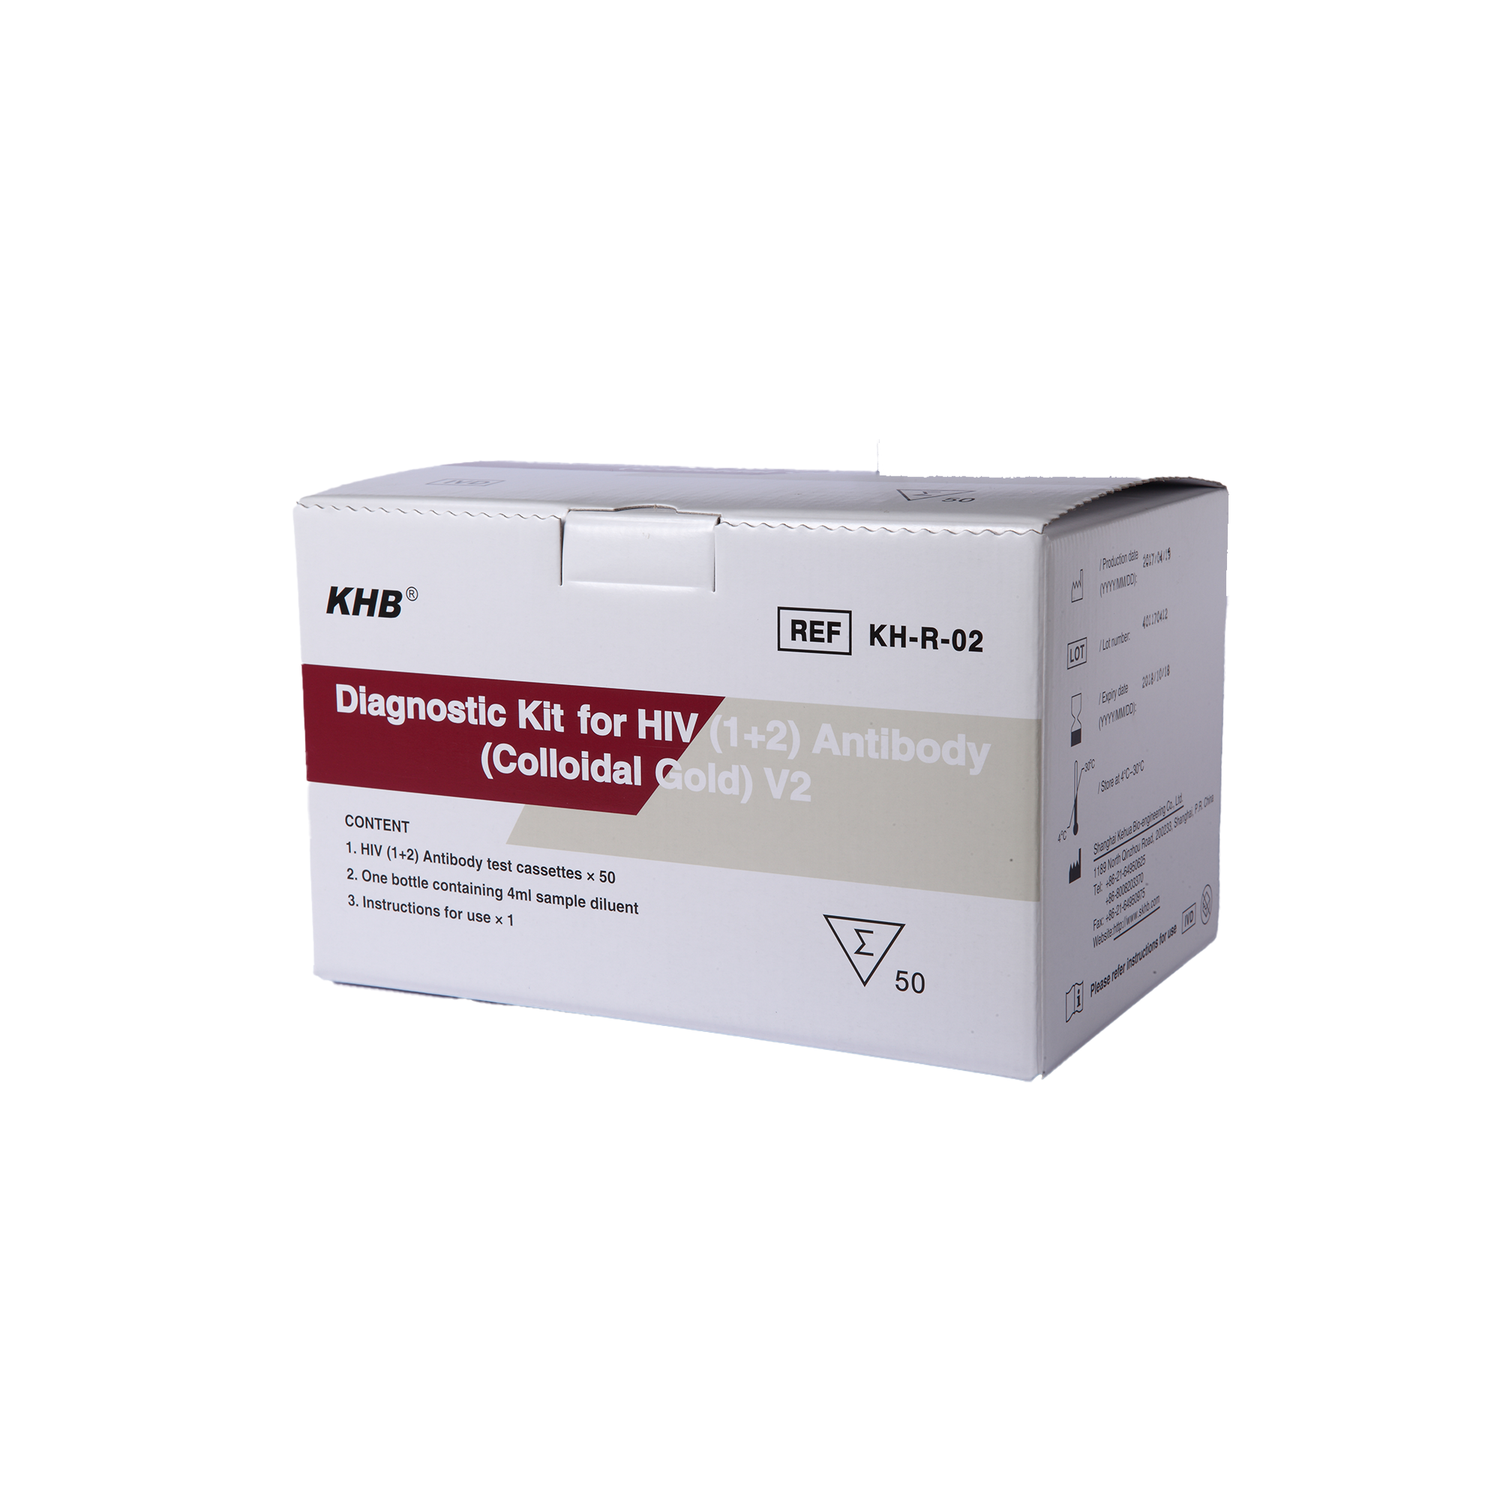 Diagnostic Kit for HIV (1+2) antibody (colloidal gold) V2, Unit: Kit of 50 Tests, Option: without accessories